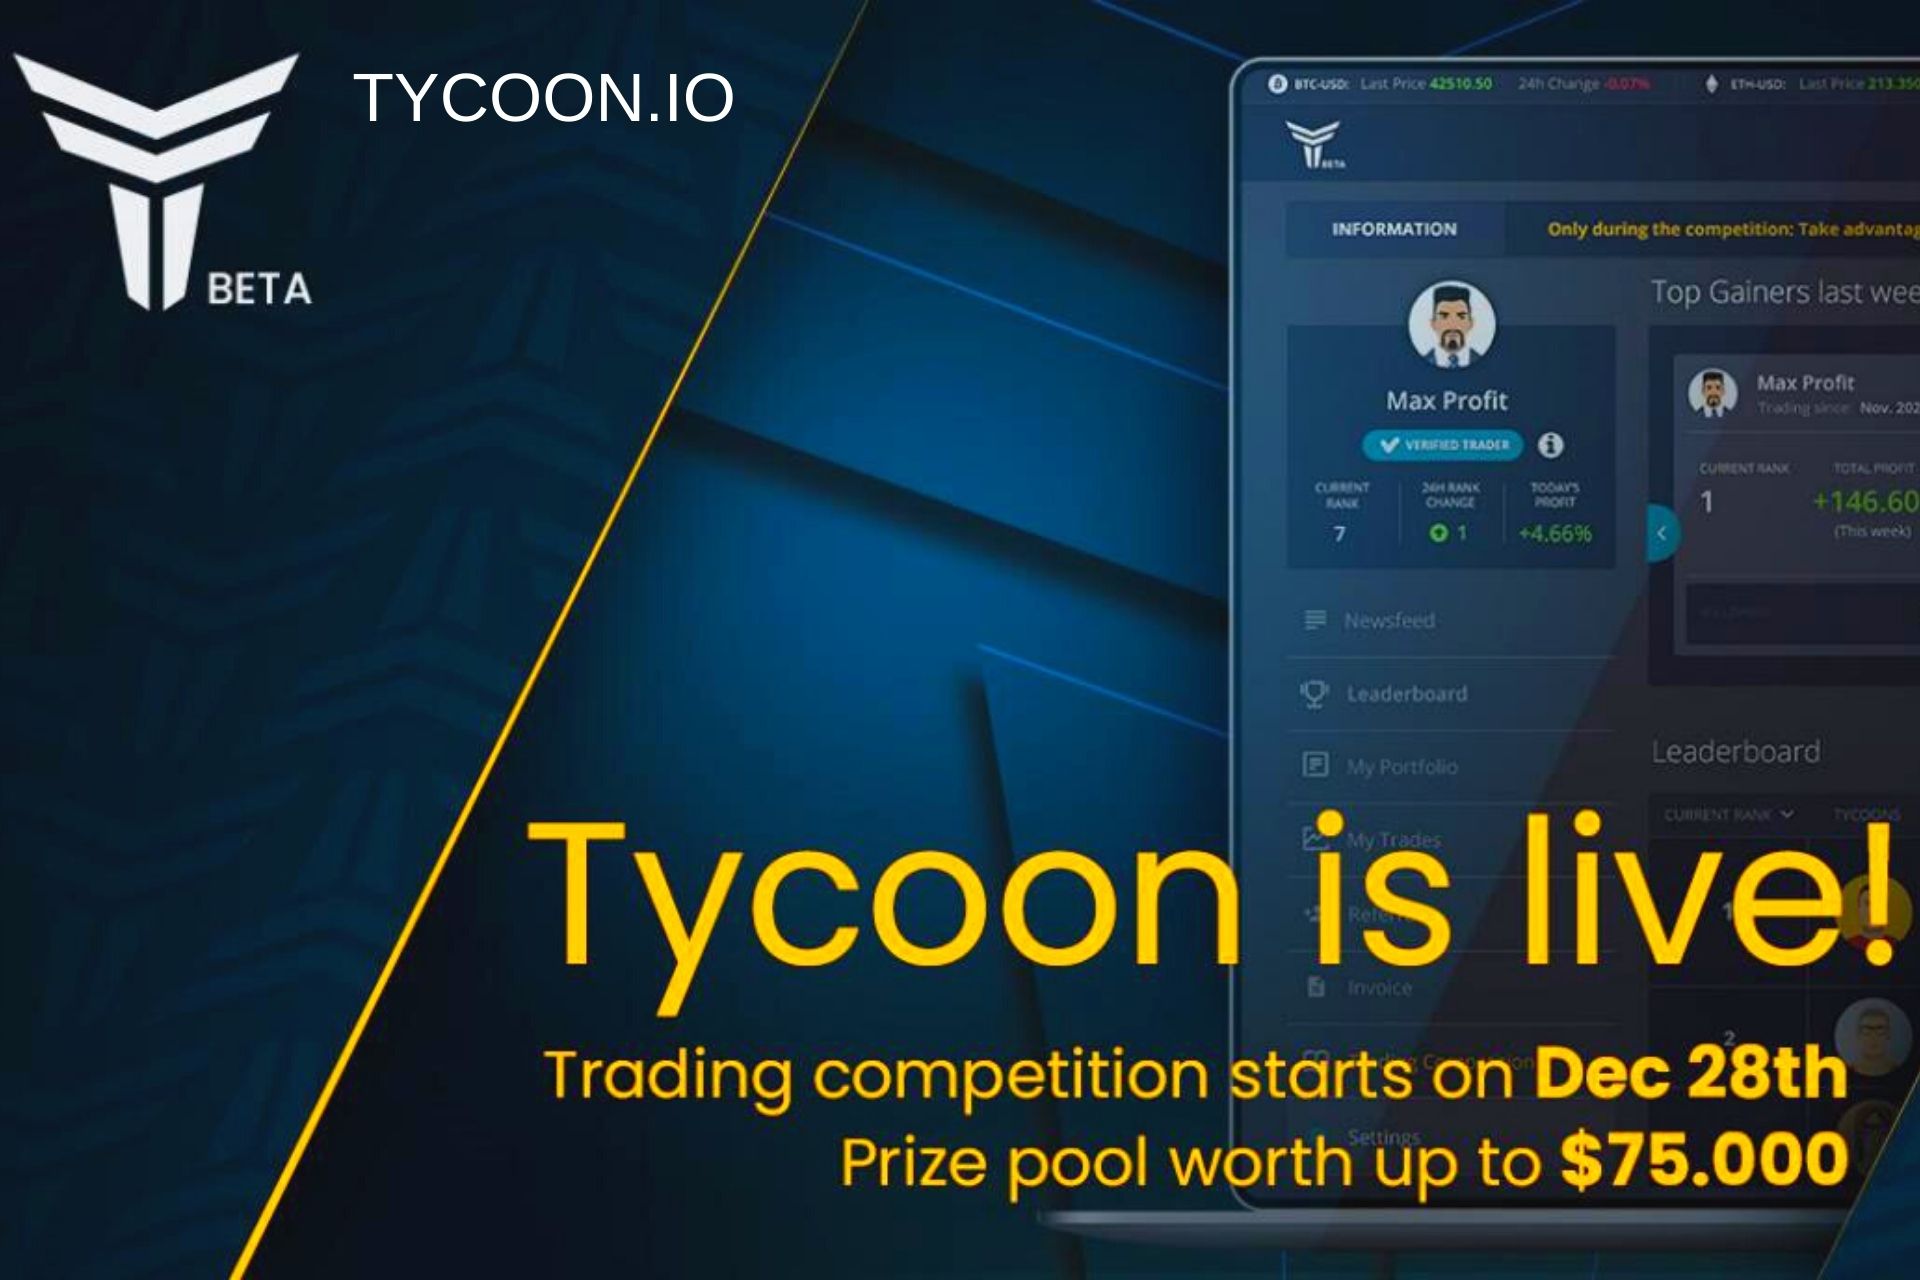 The Tycoon Social Trading Platform is Now Live! - Crypto Shib